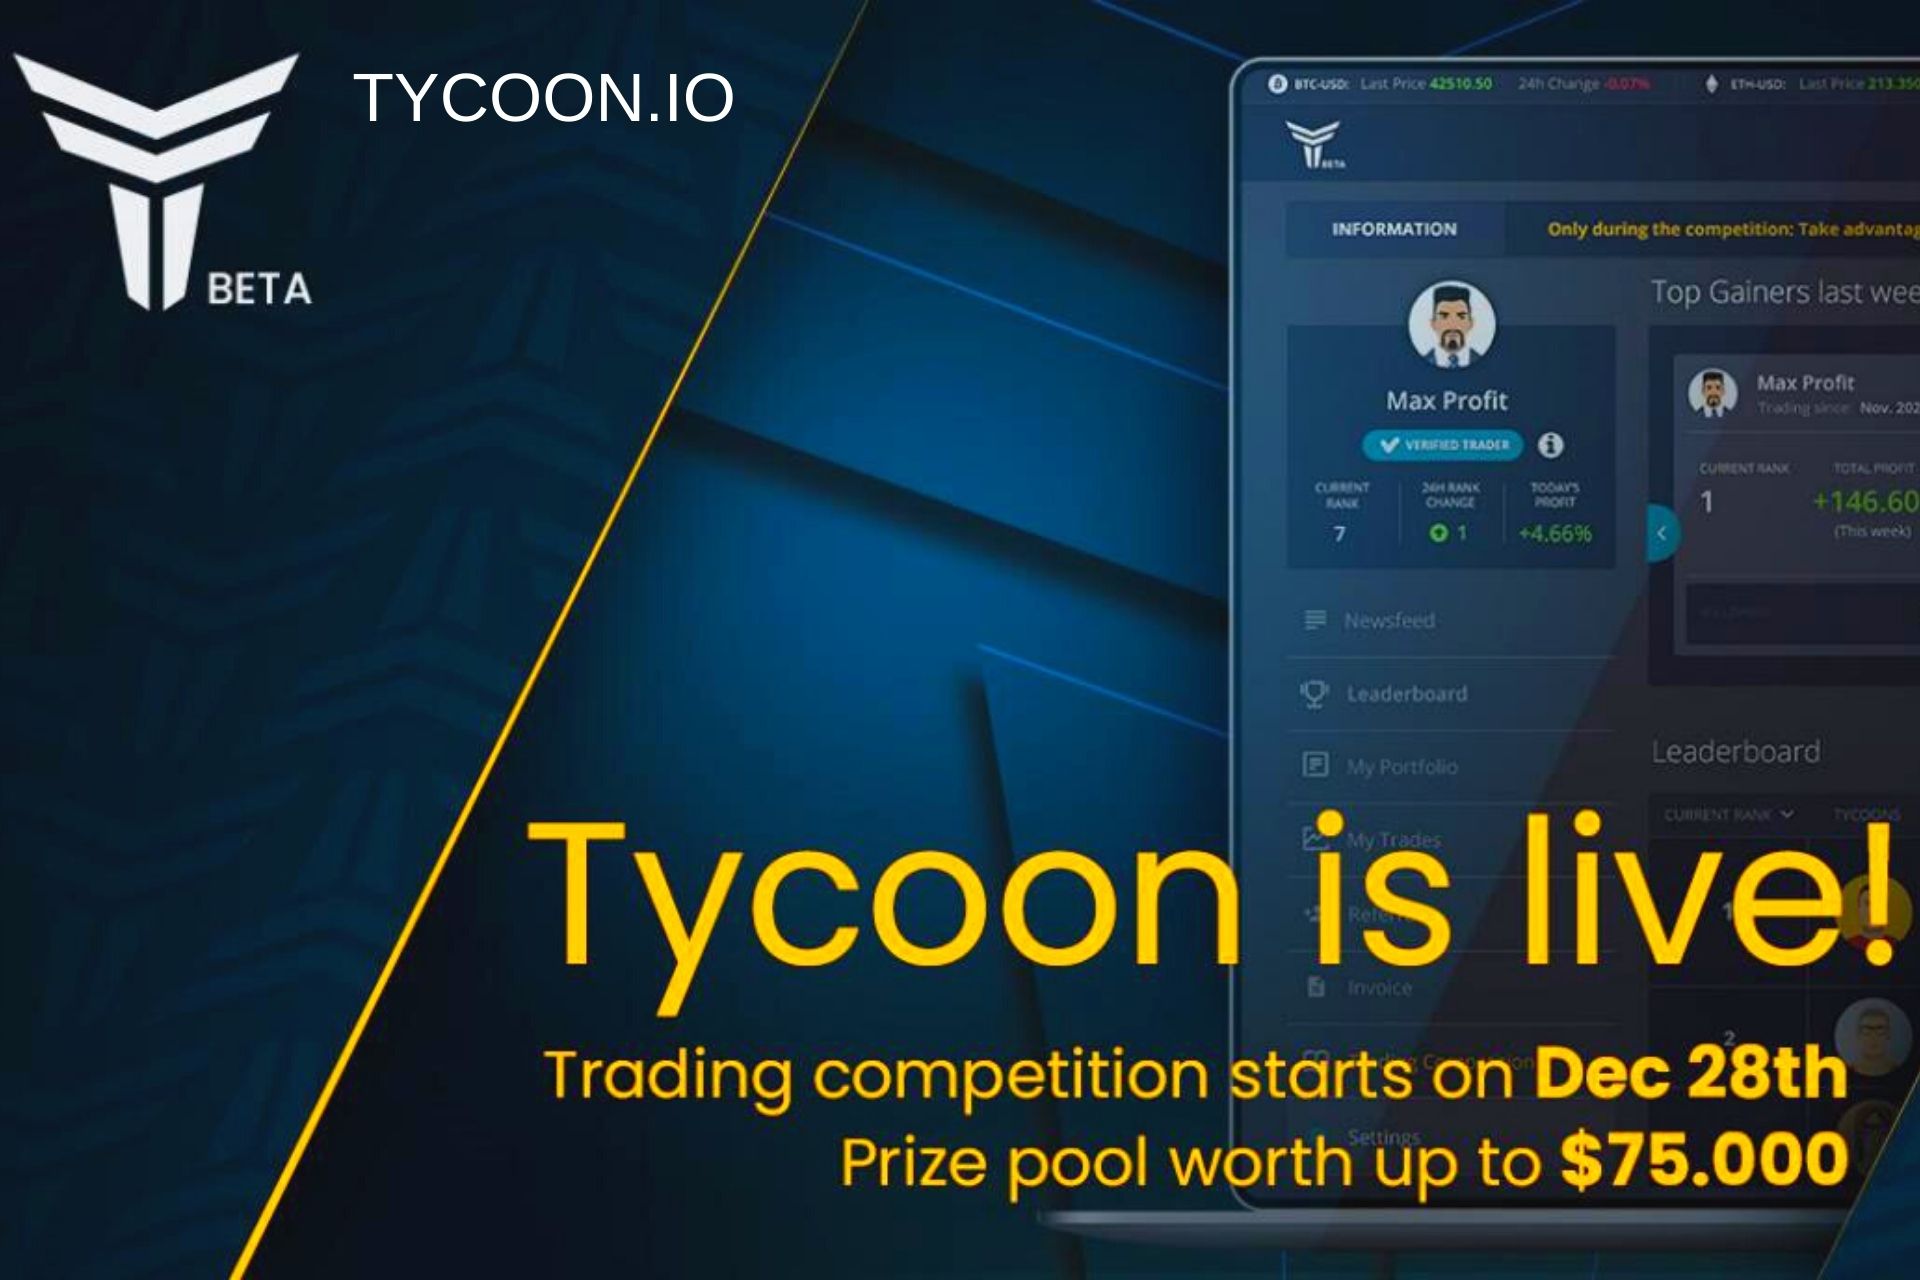 The Tycoon Social Trading Platform is Now Live! - Crypto Shib